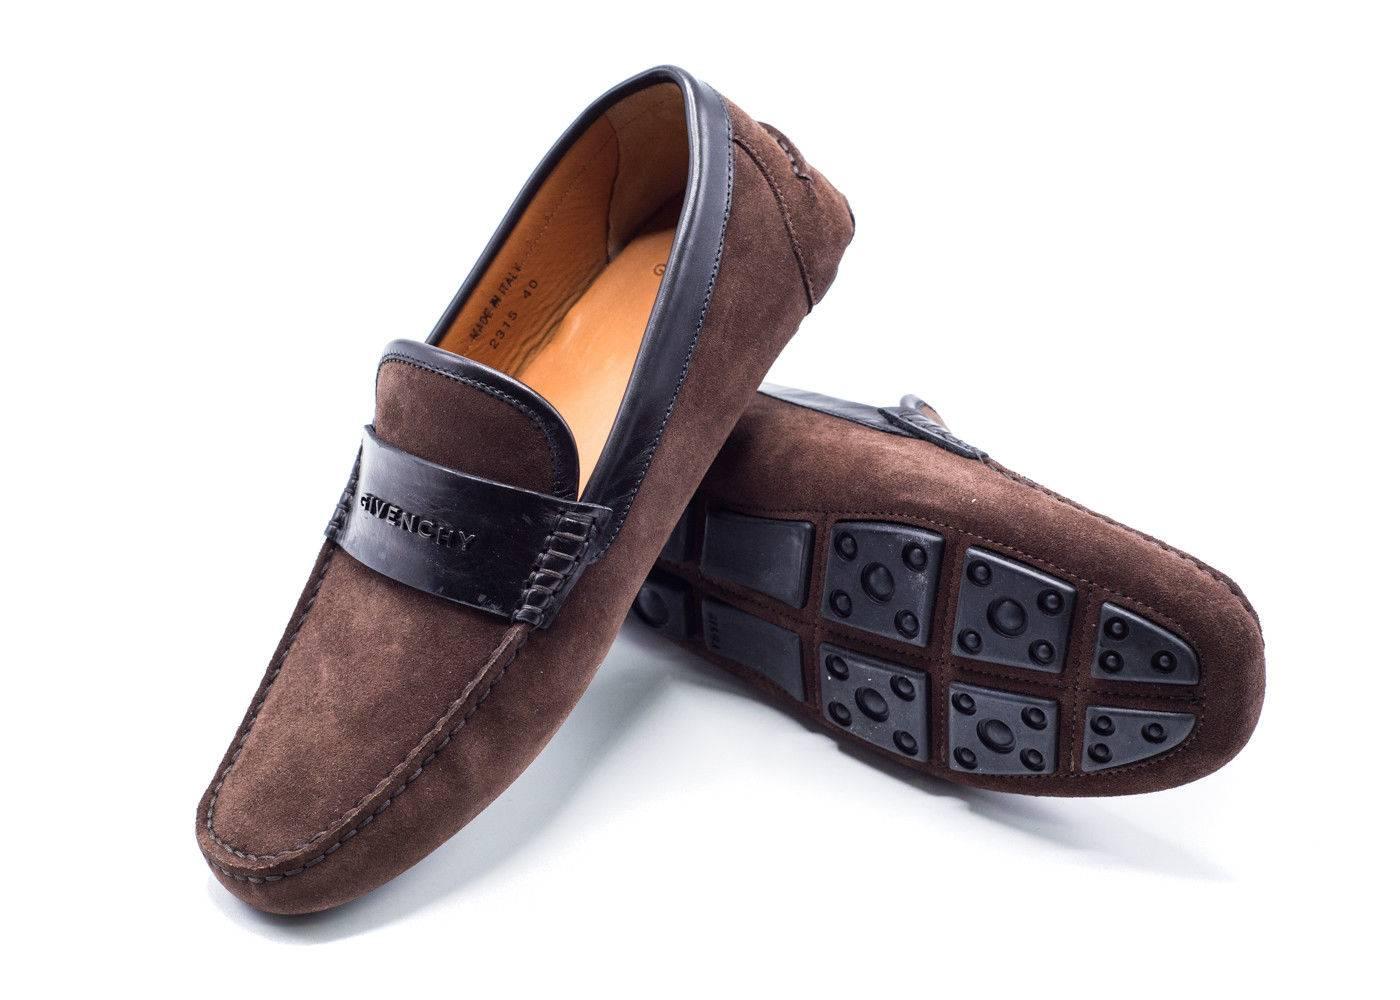 Richly made suede brown refined penny loafer styled with a stacked heel and all leather sole and insole. This Givenchy penny loafer is the perfect shoe for the every day business man. With the deep brown color on the shoes, they will make an ever